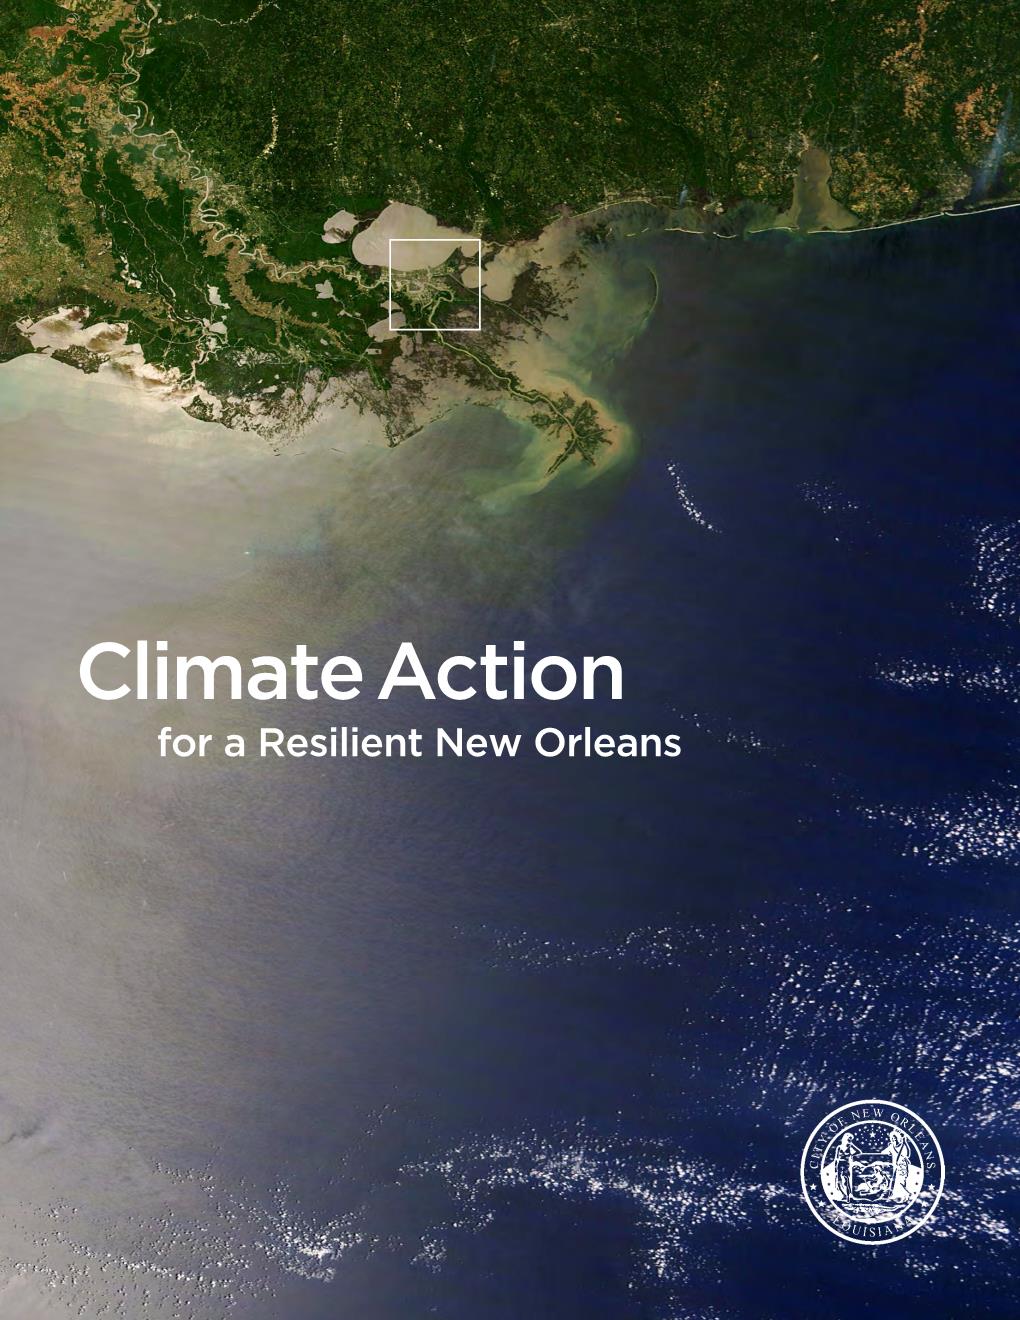 Pages-from-Climate-Action-for-a-Resilient-New-Orleans.jpg